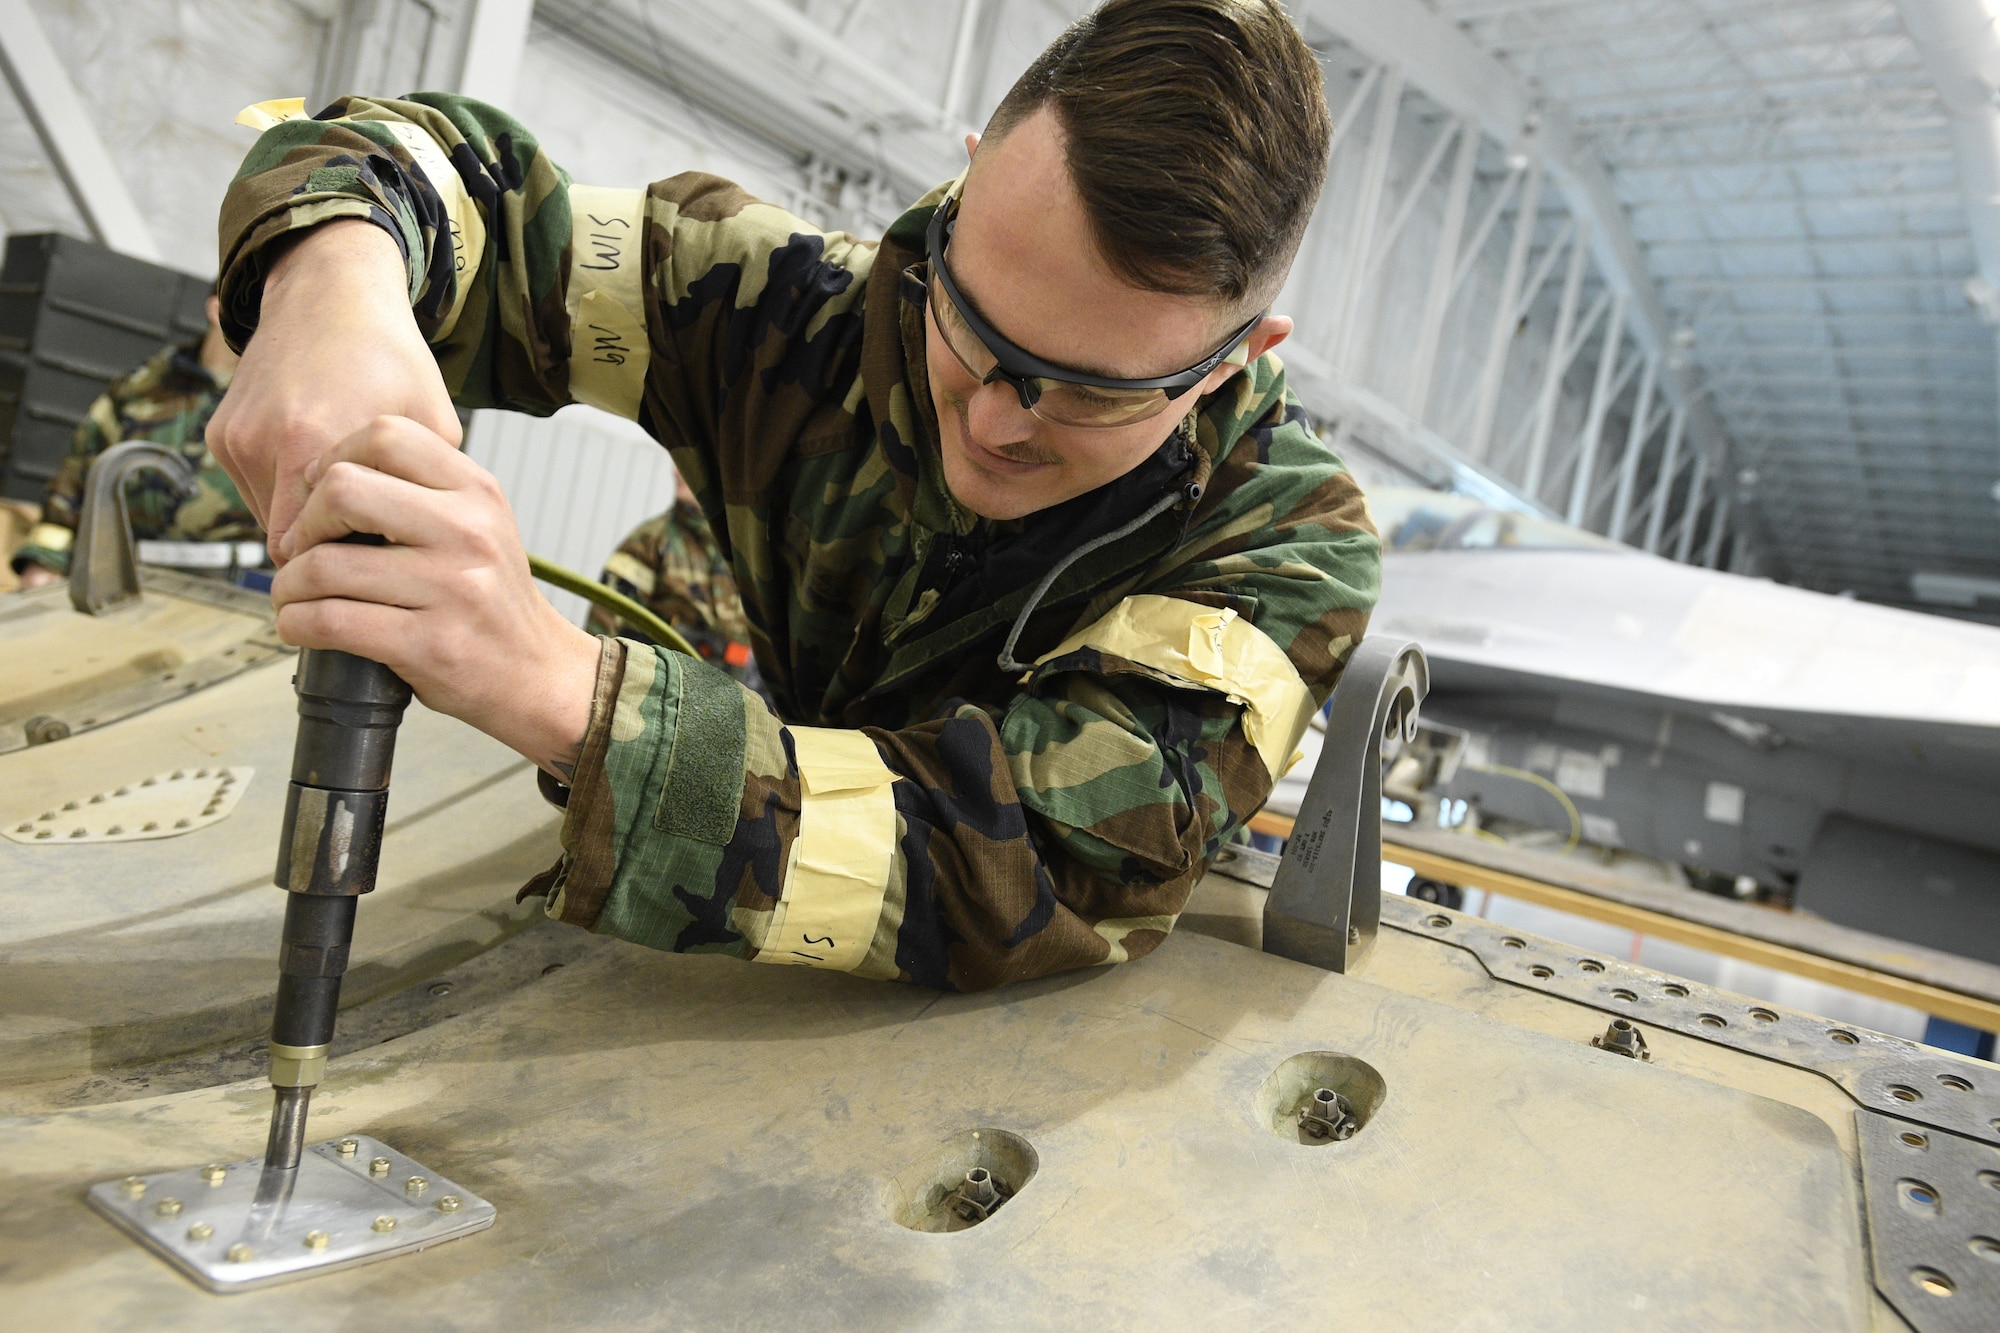 Avionics technician Staff Sgt. Lance Mosley, 309th Aircraft Maintenance Group Expeditionary Depot Maintnenance, installs a sheet metal repair during an exercise at Hill Air Force Base, Utah, May 21, 2019.